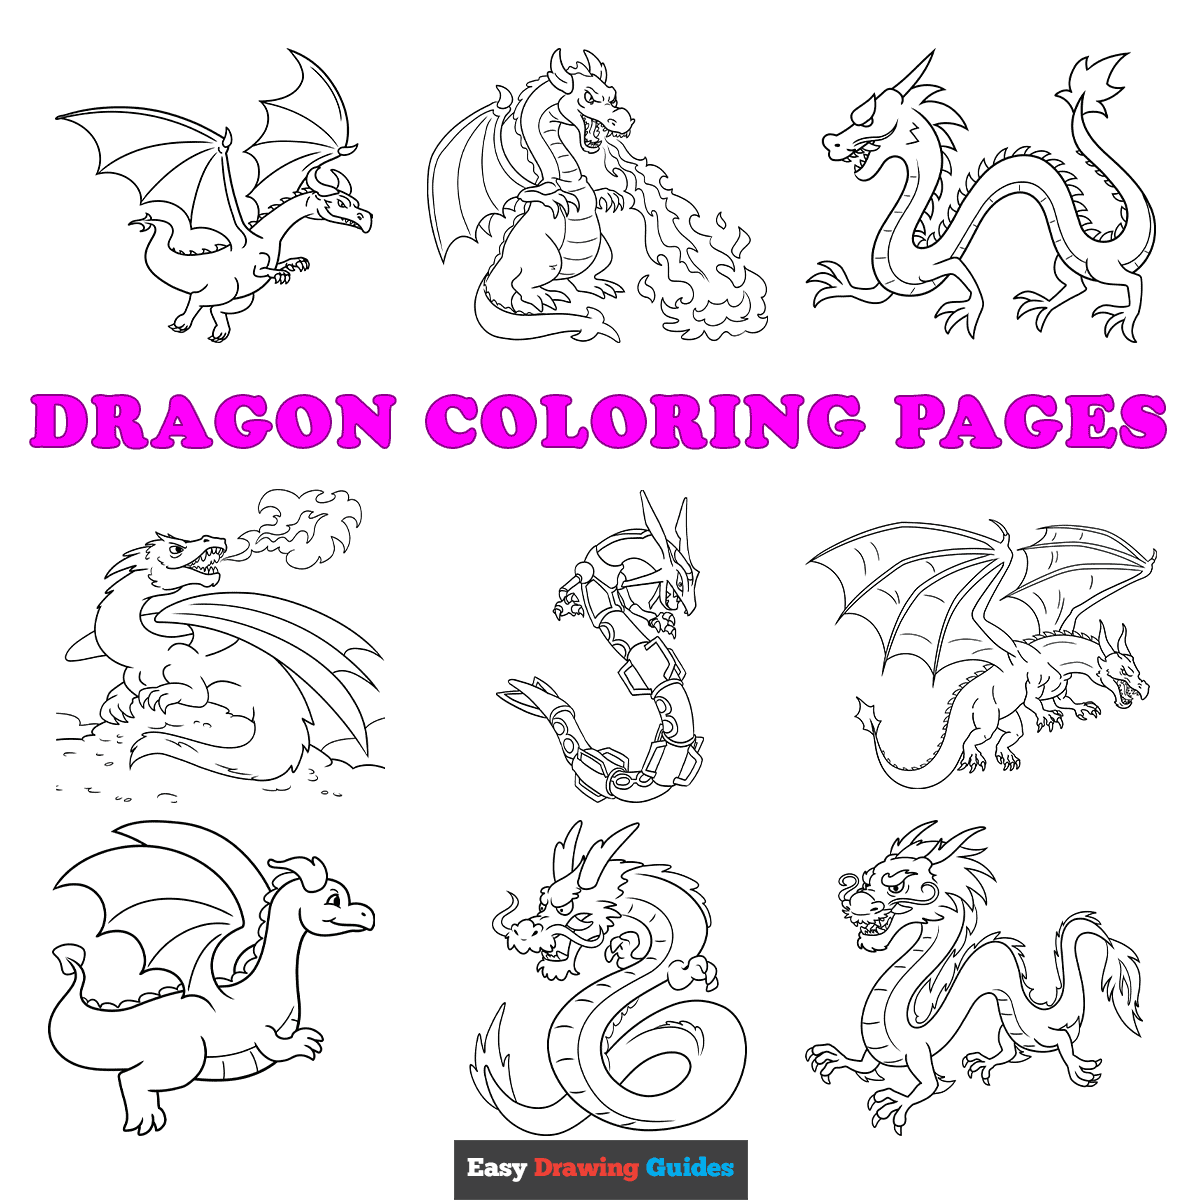 Free printable dragon coloring pages for kids